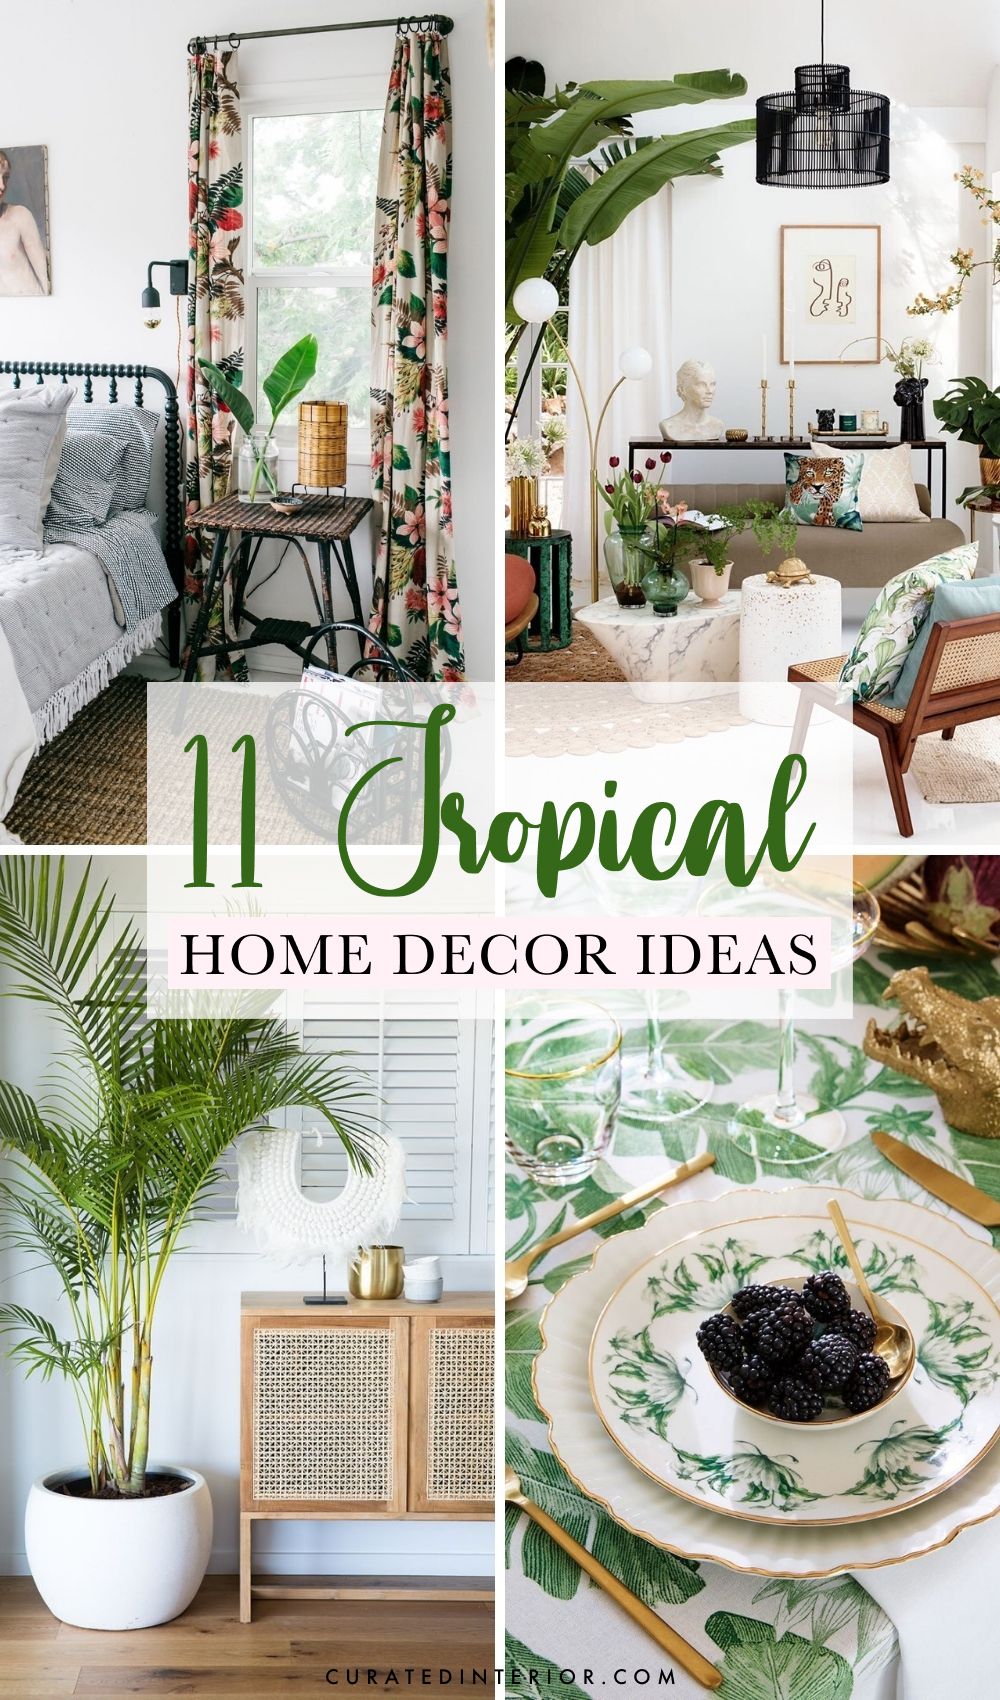 18 Ways to Get a Tropical Decor Vibe in Your Home